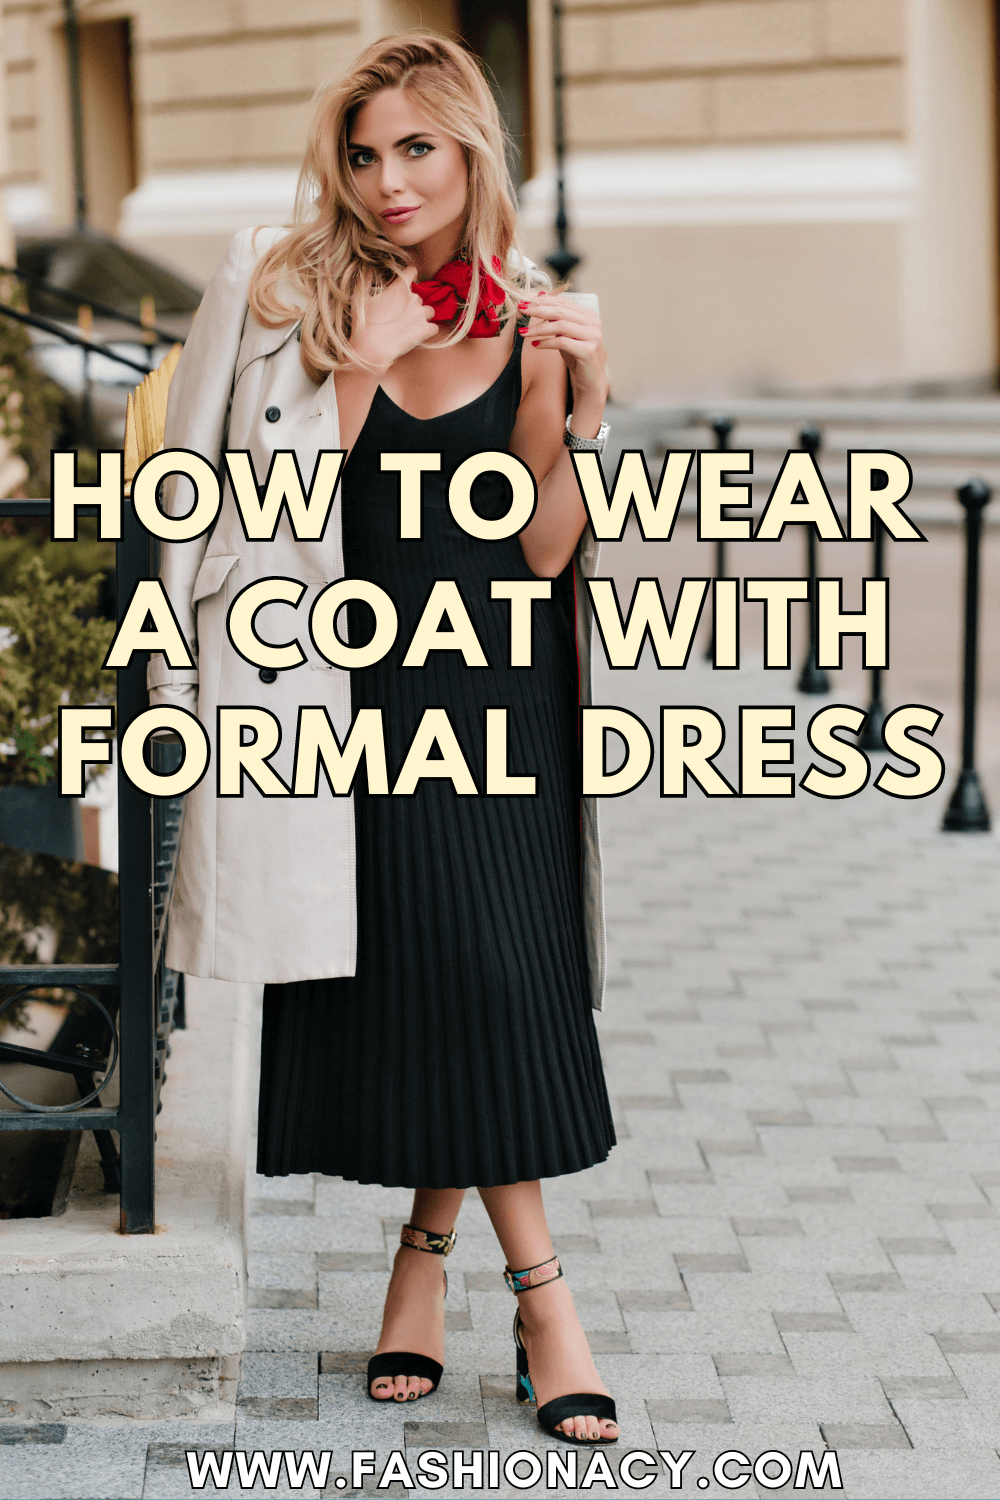 How to Wear Coat With Dress